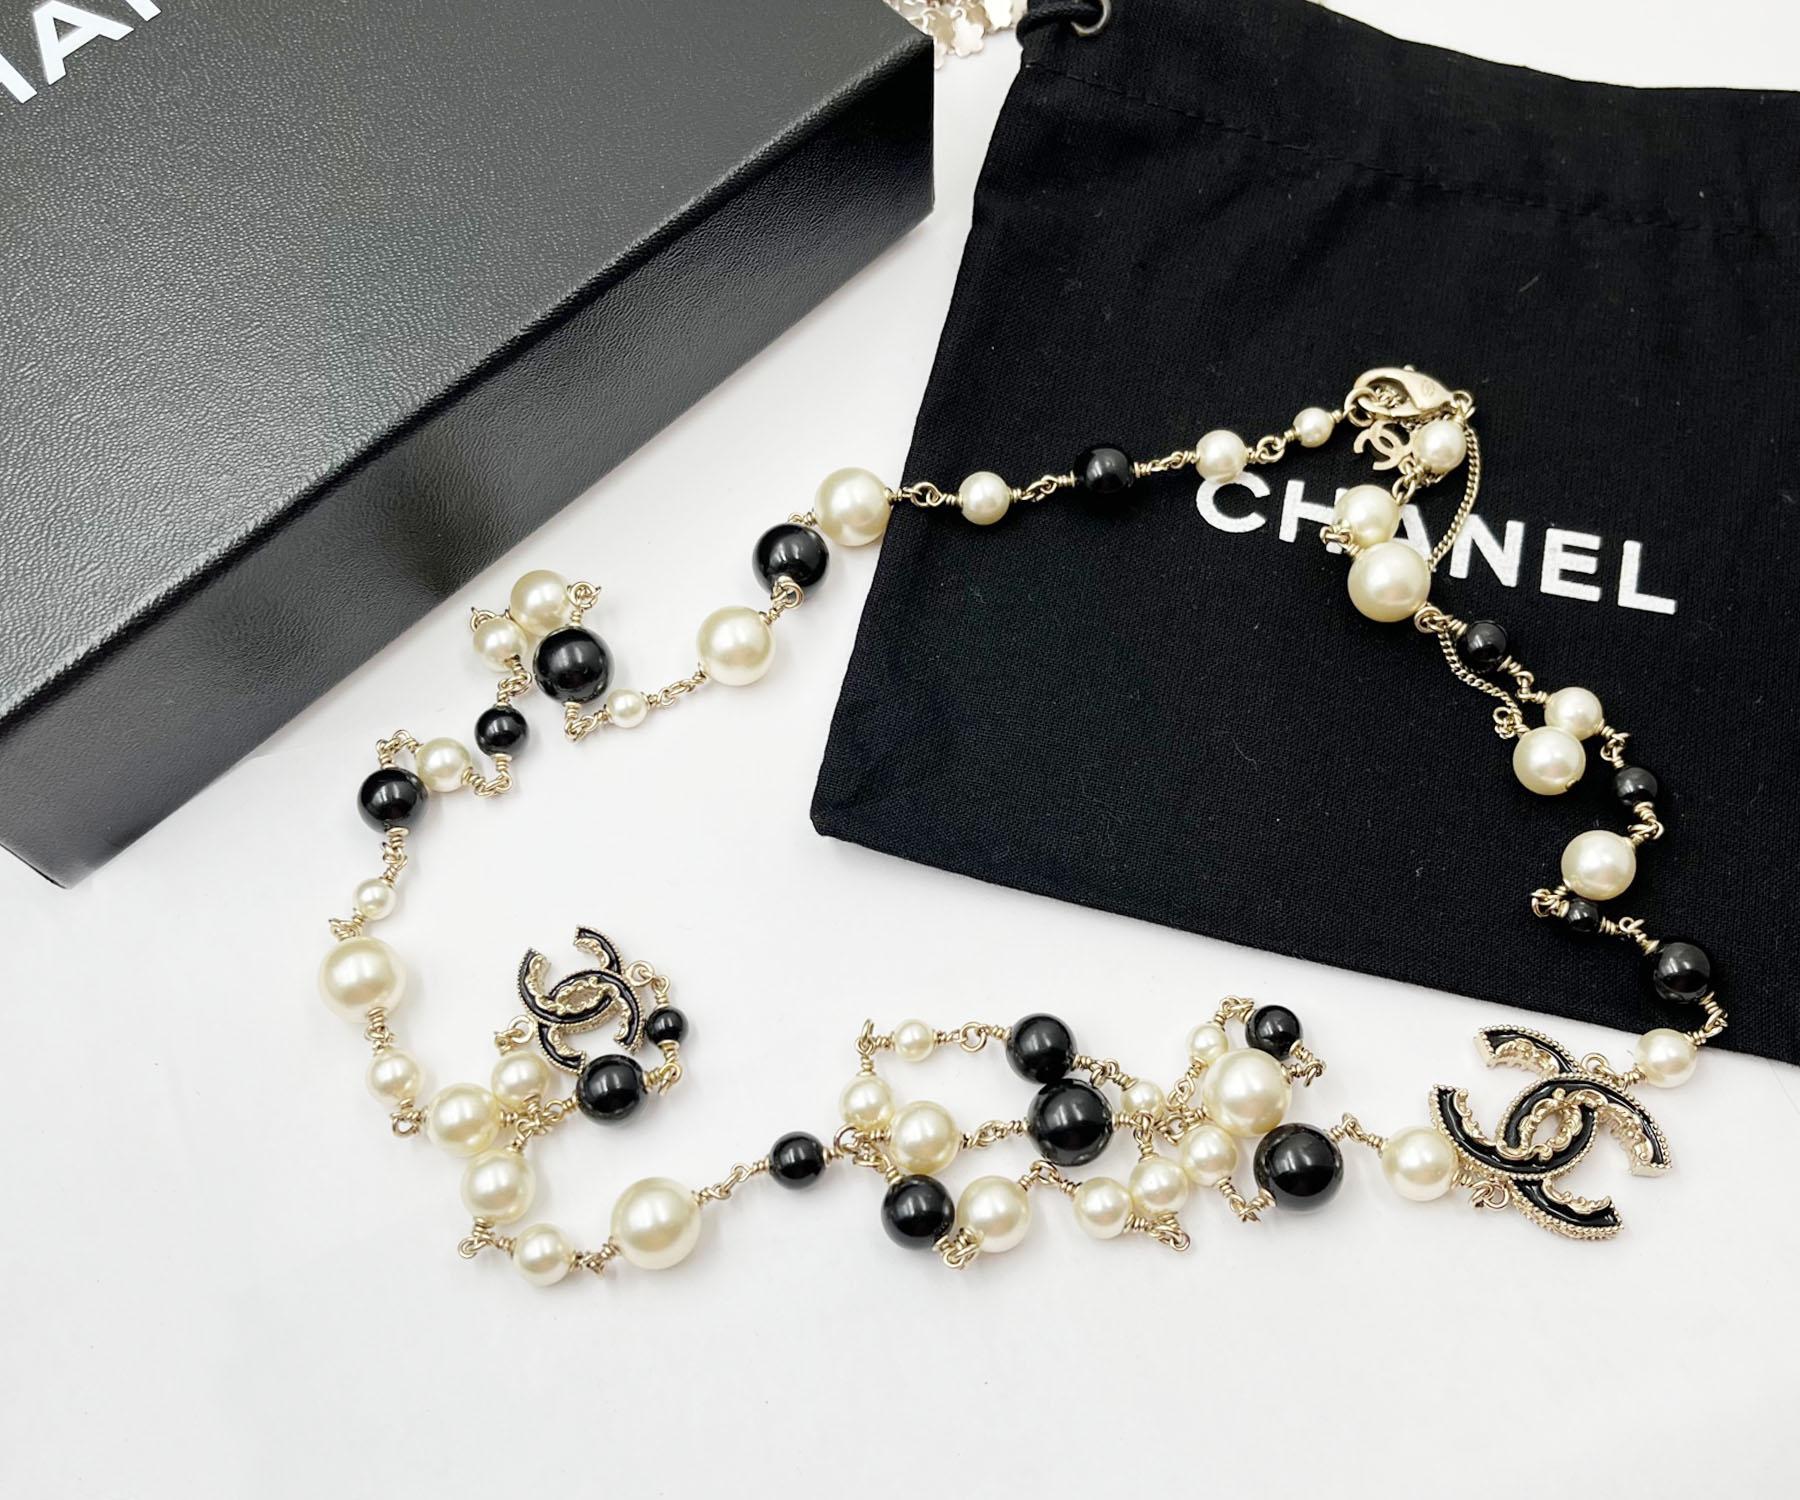 Chanel Gold CC Black Ruffle Pearl Long Necklace

* Marked 13
* Made in Italy
*Comes with the original box and dustbag

-It is approximately 42